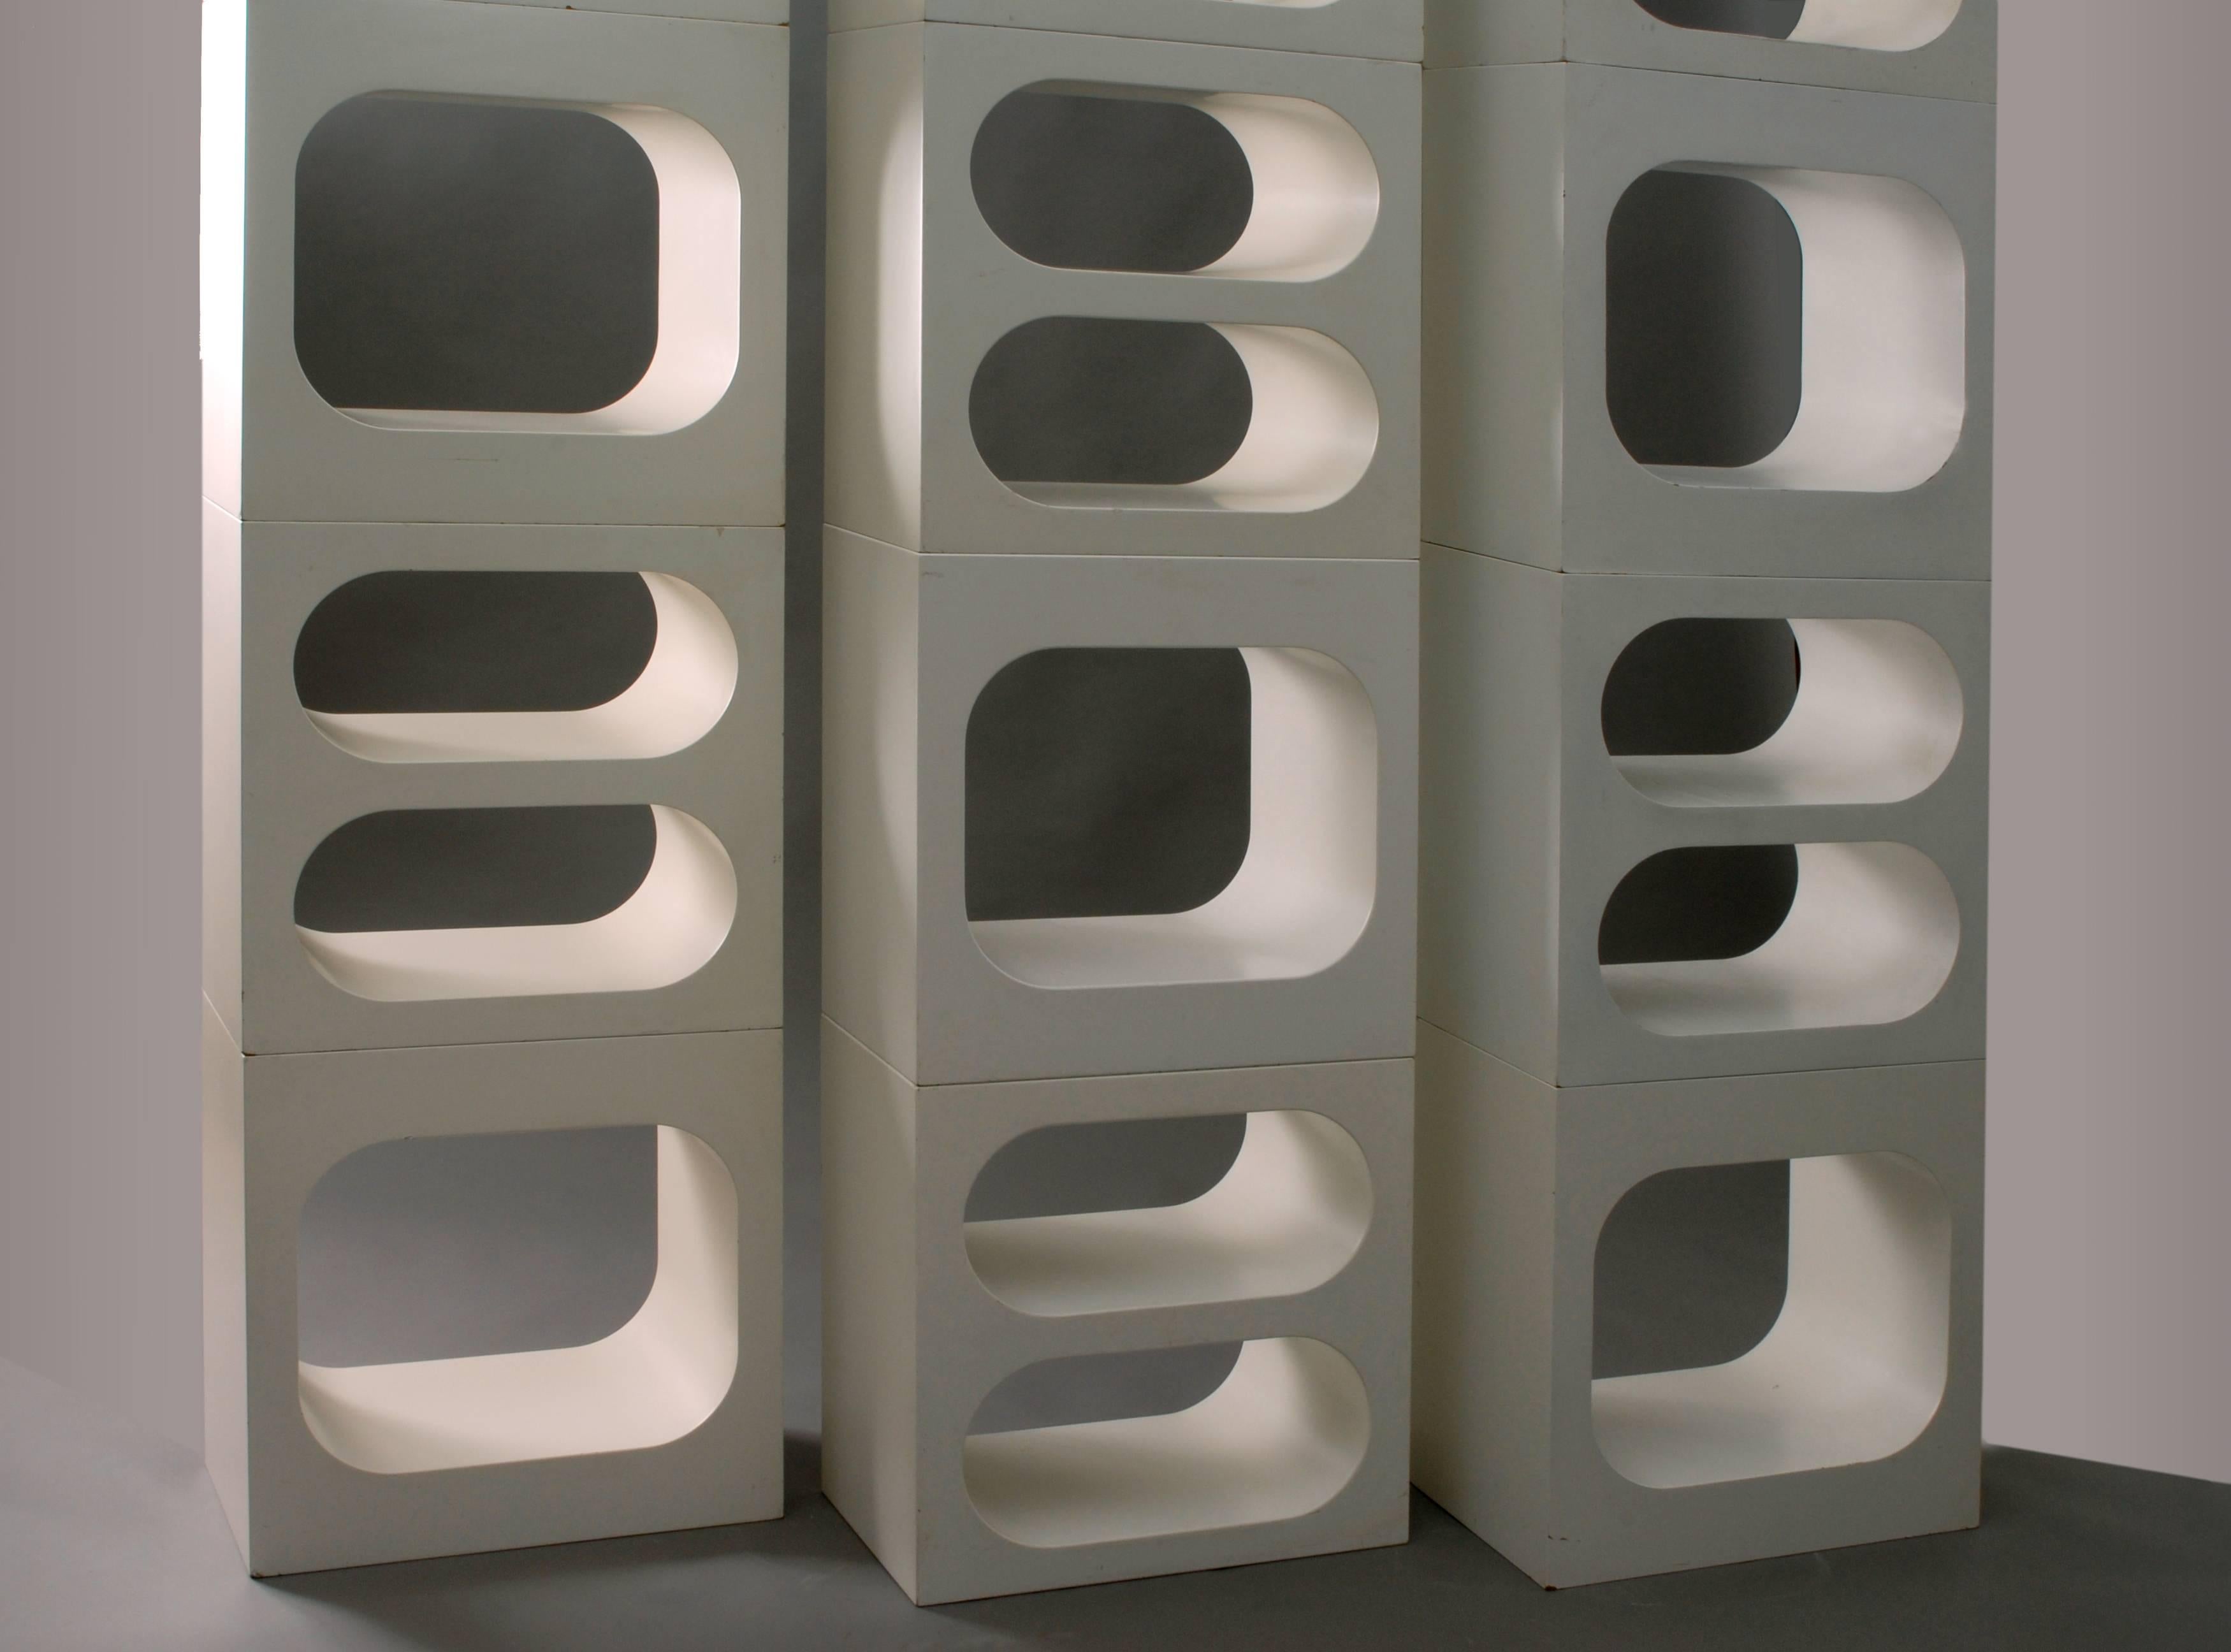 Formidable huge modular room divider which you can use as wall unit, sculpture, bookcase, room divider or separately. Each cube is 55 cm long, 55 cm high and 30cm deep. Cubes have metal base with white fiberglass cover, on surface are some minor